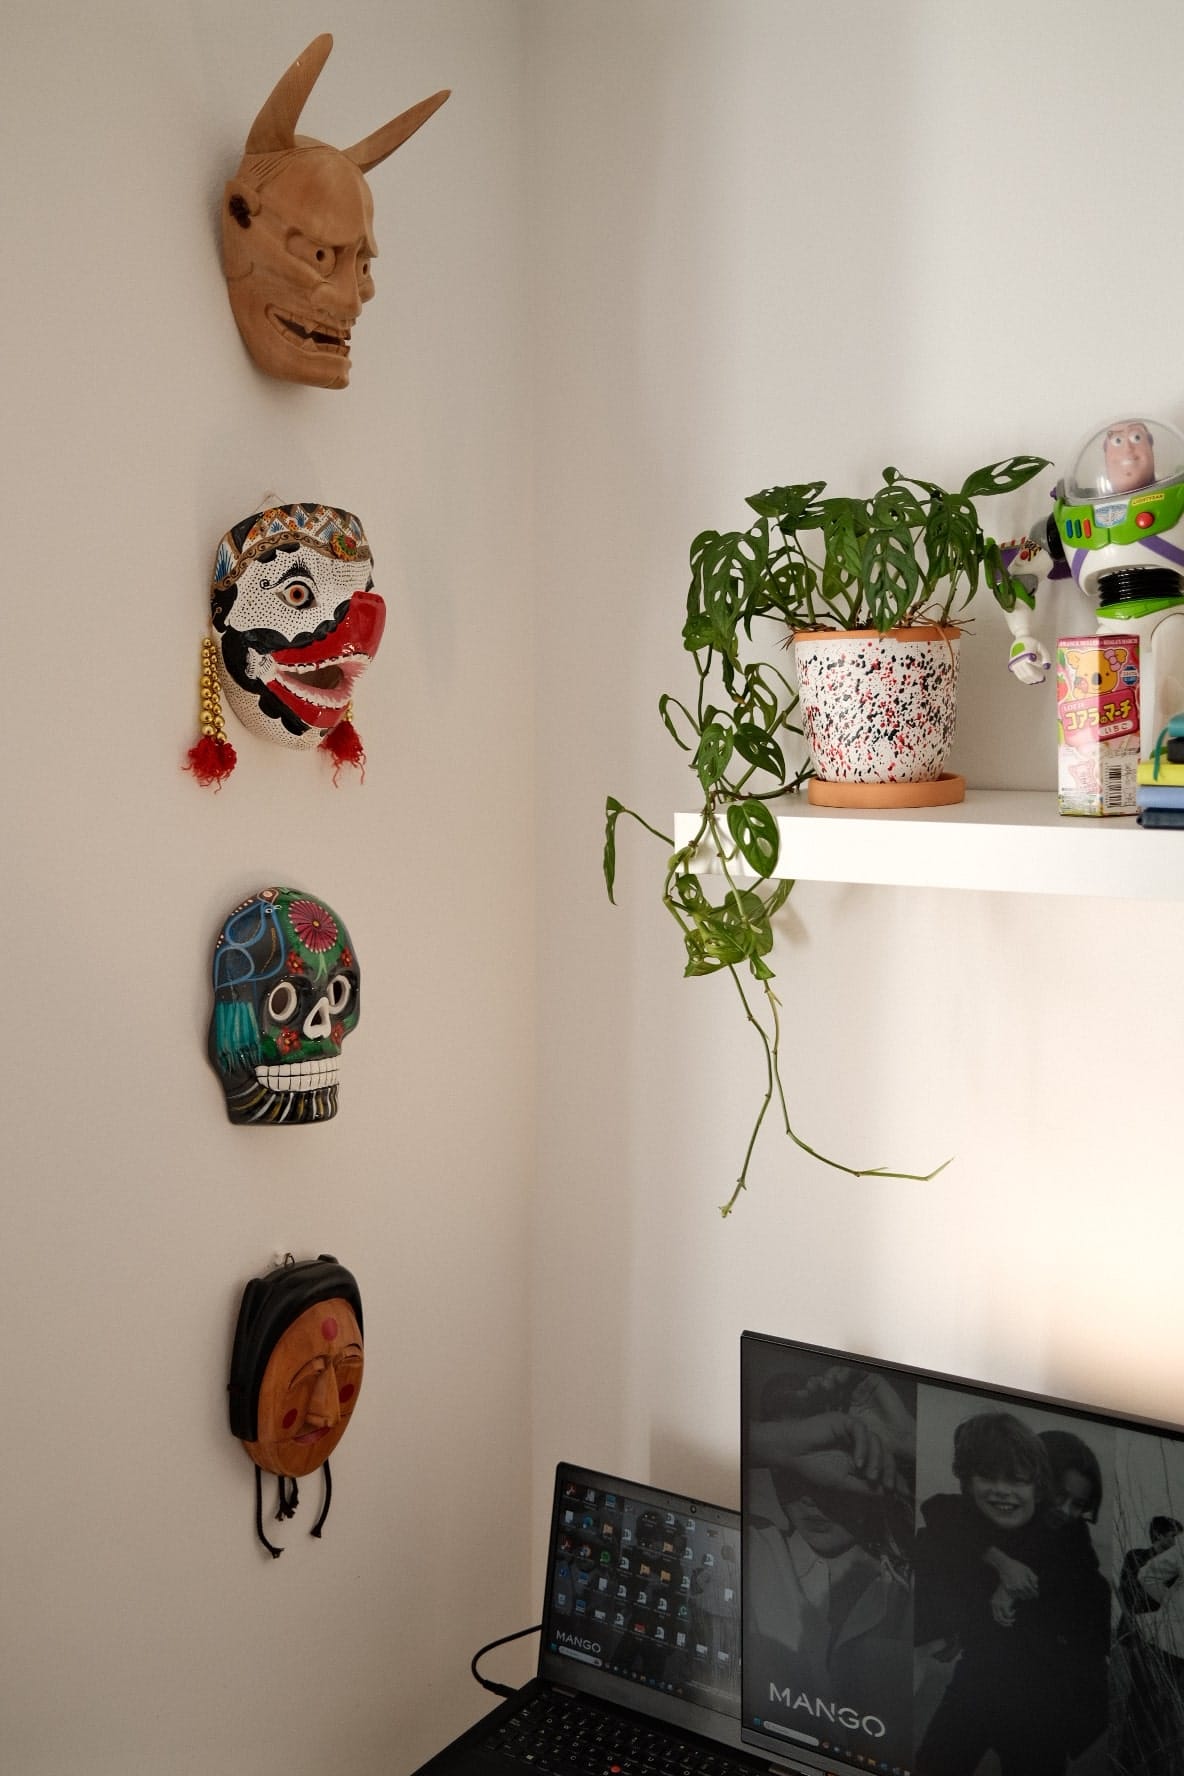  Part of a room with cultural masks hanging on the wall, a potted plant on a shelf, and a laptop with a screensaver on a desk